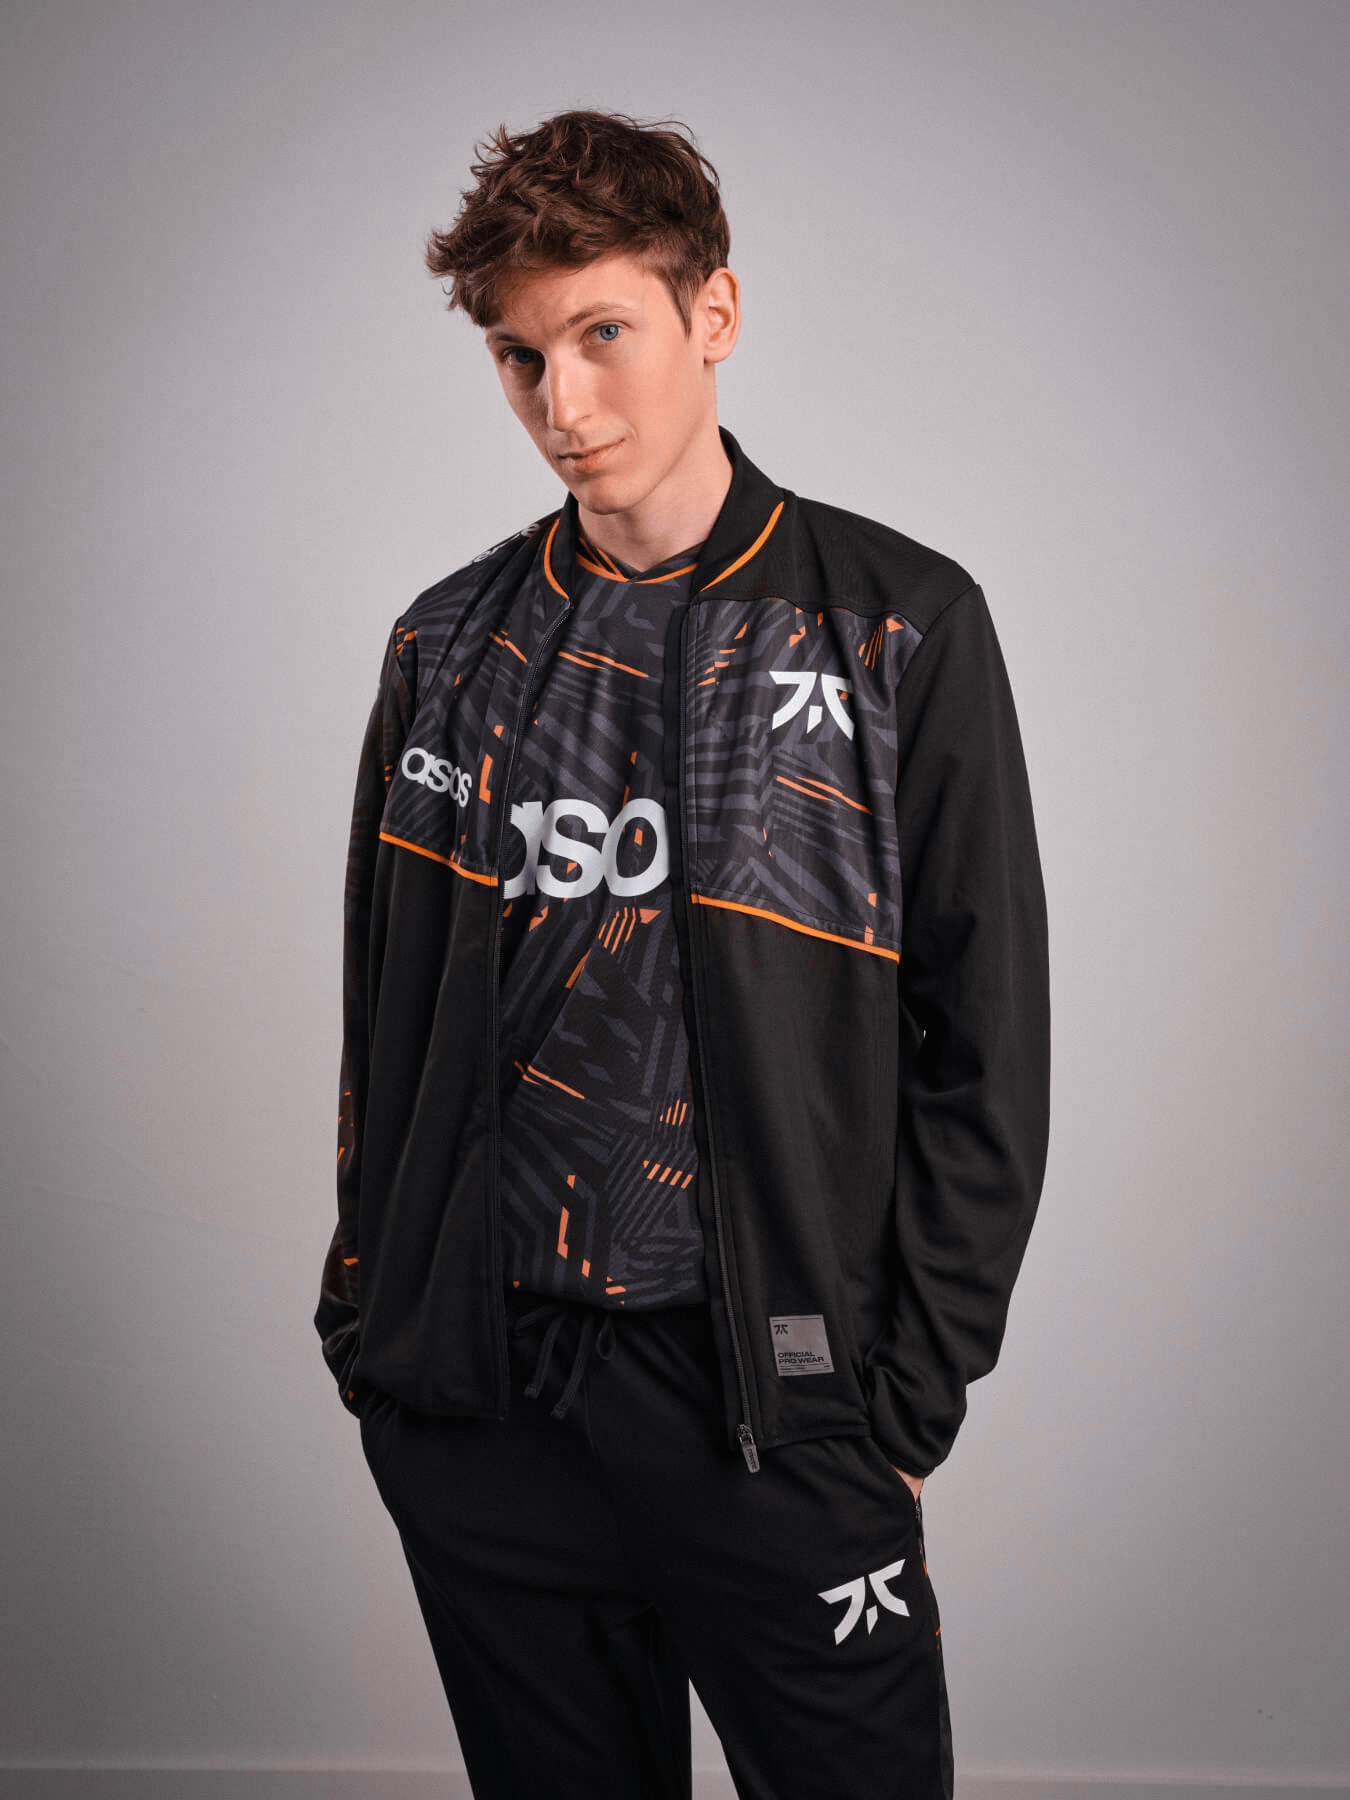 The ASOS x Fnatic Collection Has Landed